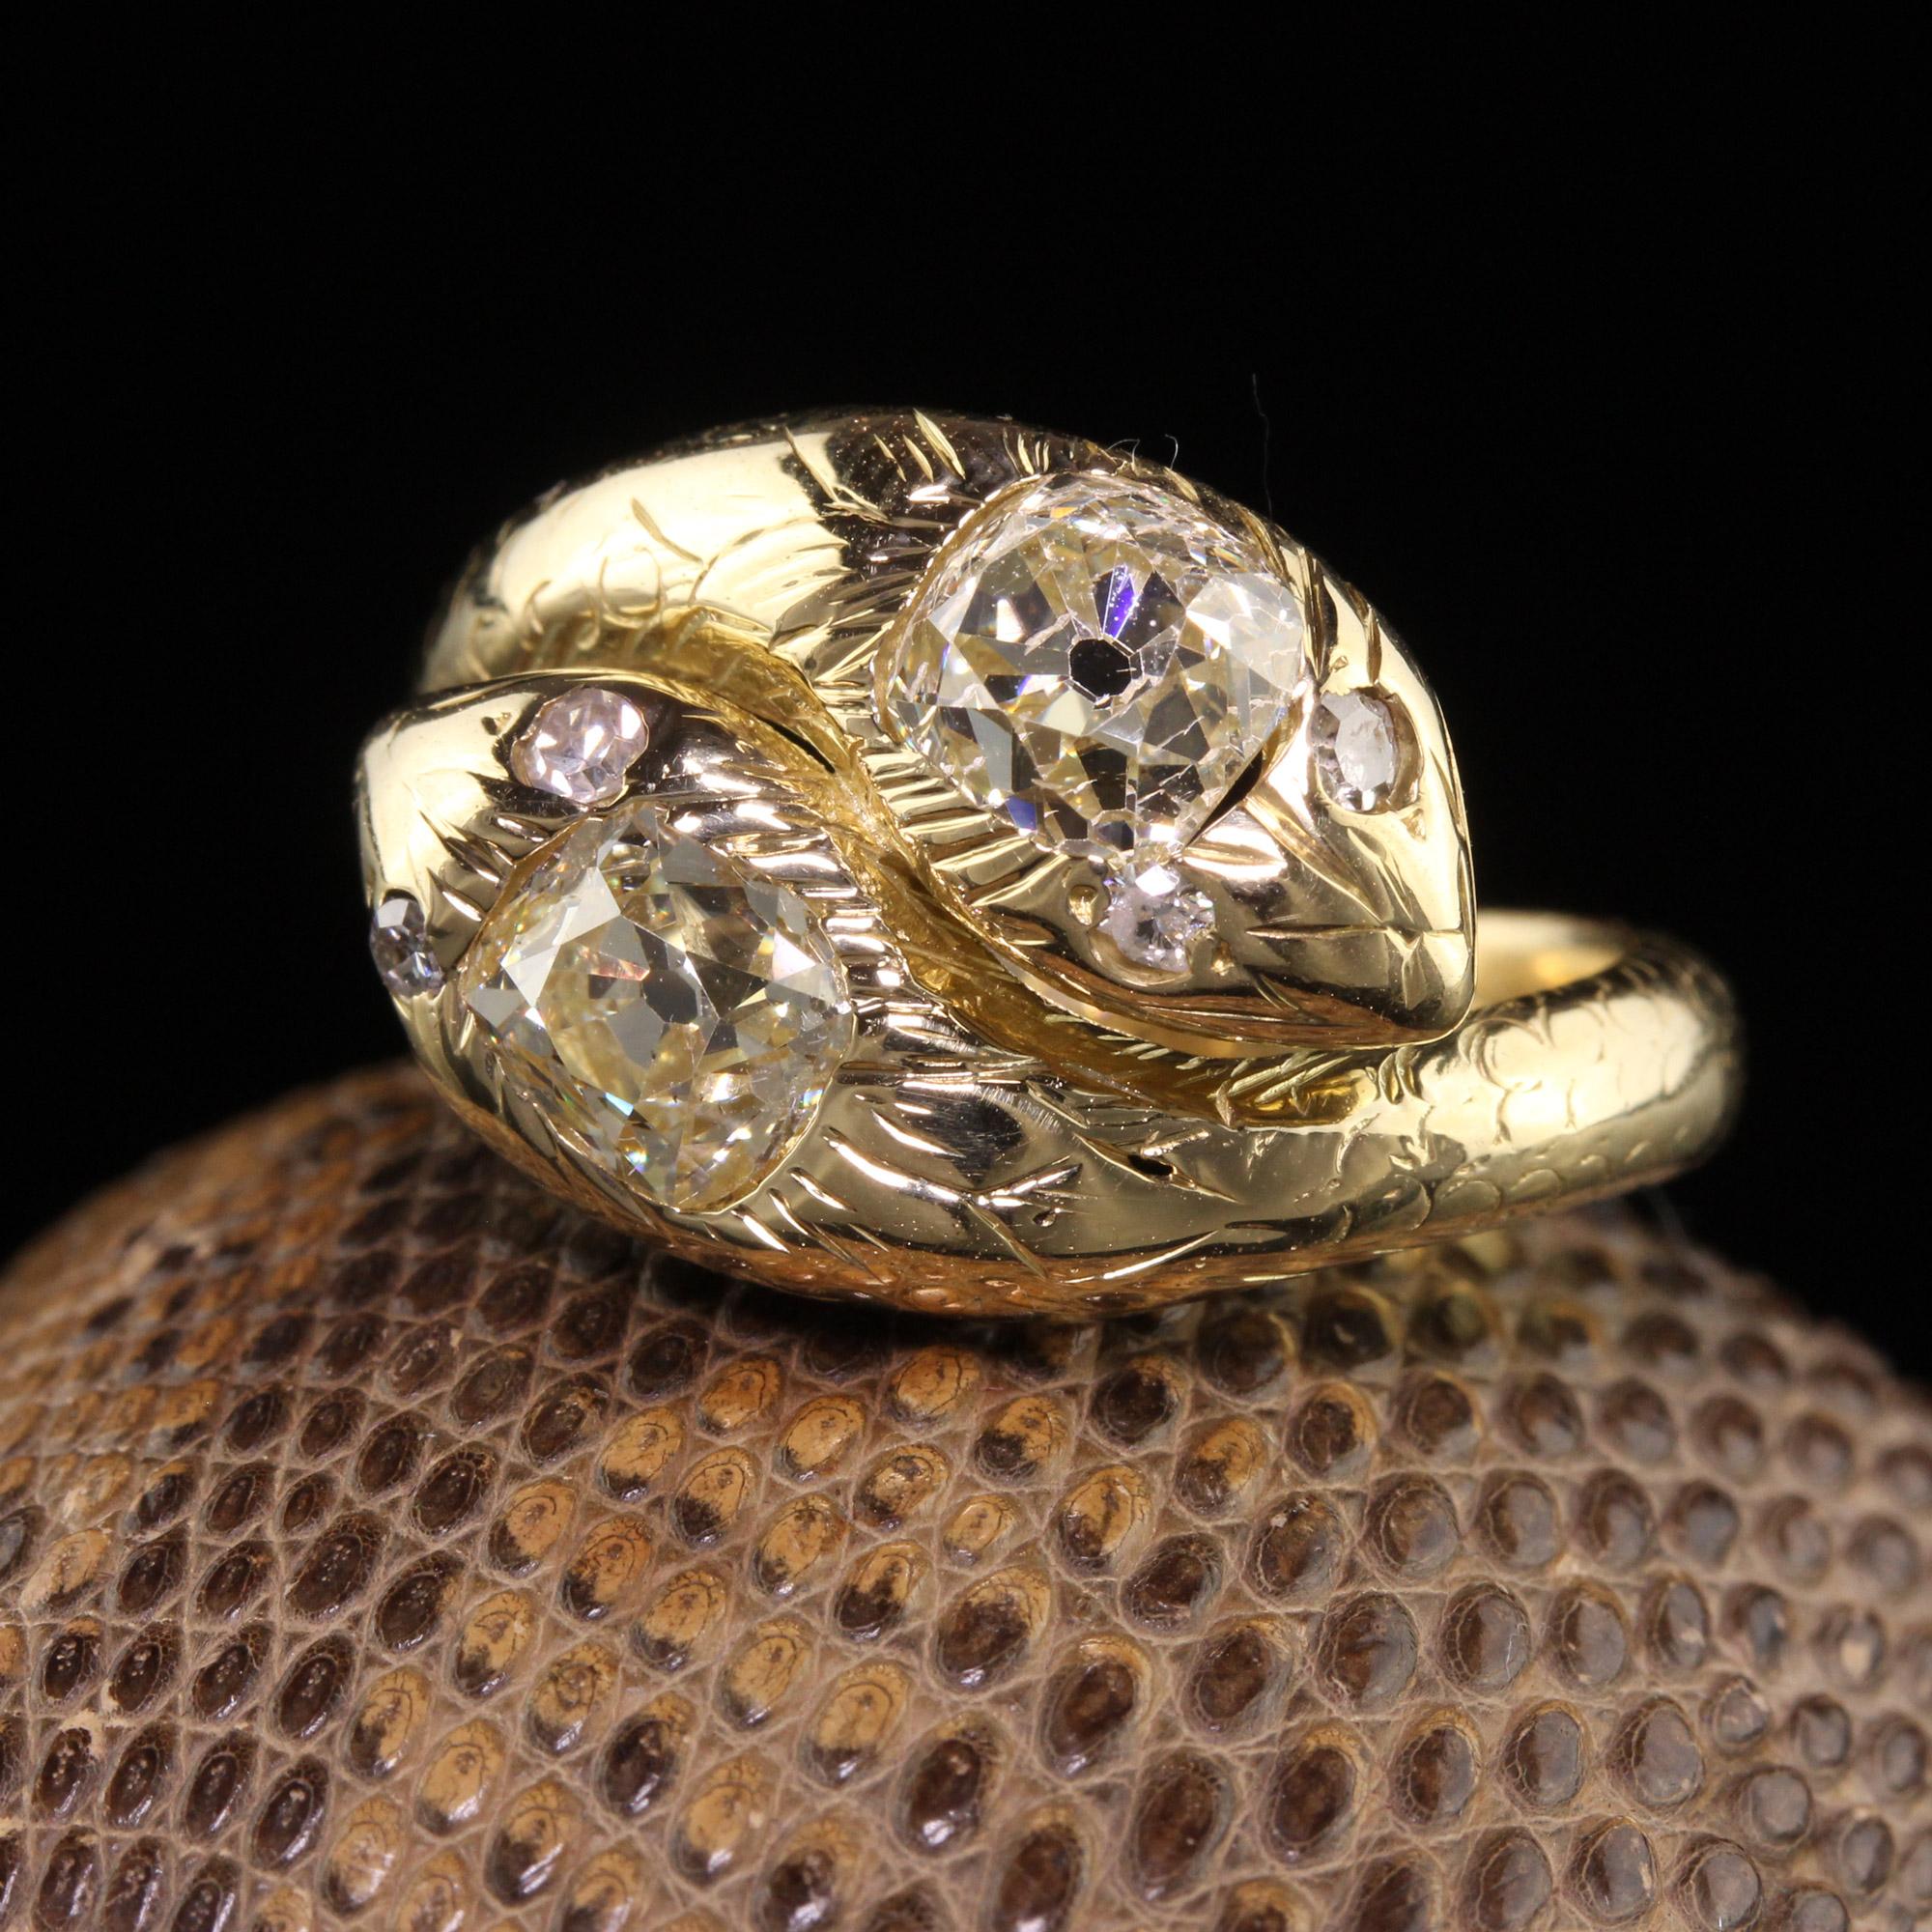 Beautiful Antique Victorian 18K Yellow Gold Old Mine Cut Diamond Double Snake Ring. This gorgeous ring is crafted in 18k yellow gold. The snake heads feature two large and chunky old mine cut diamonds with single cut diamonds for the eyes. The ring